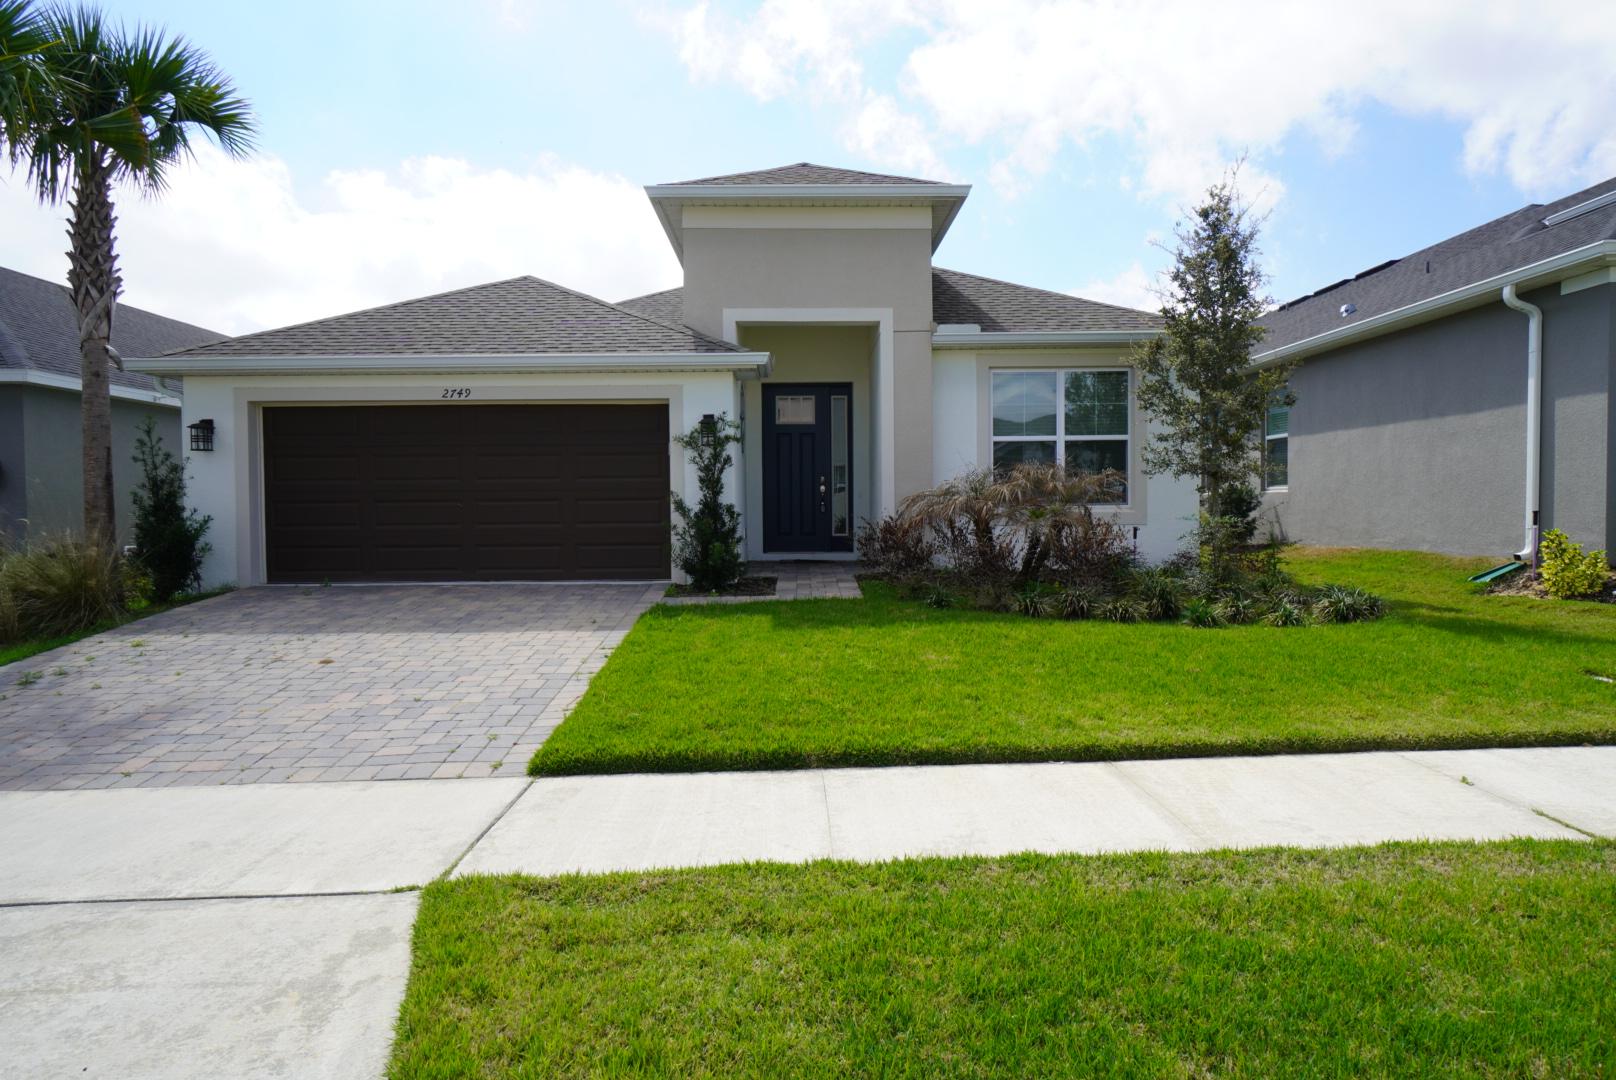 Photo of property: 2749 Hilltop Road Clermont, FL 34711